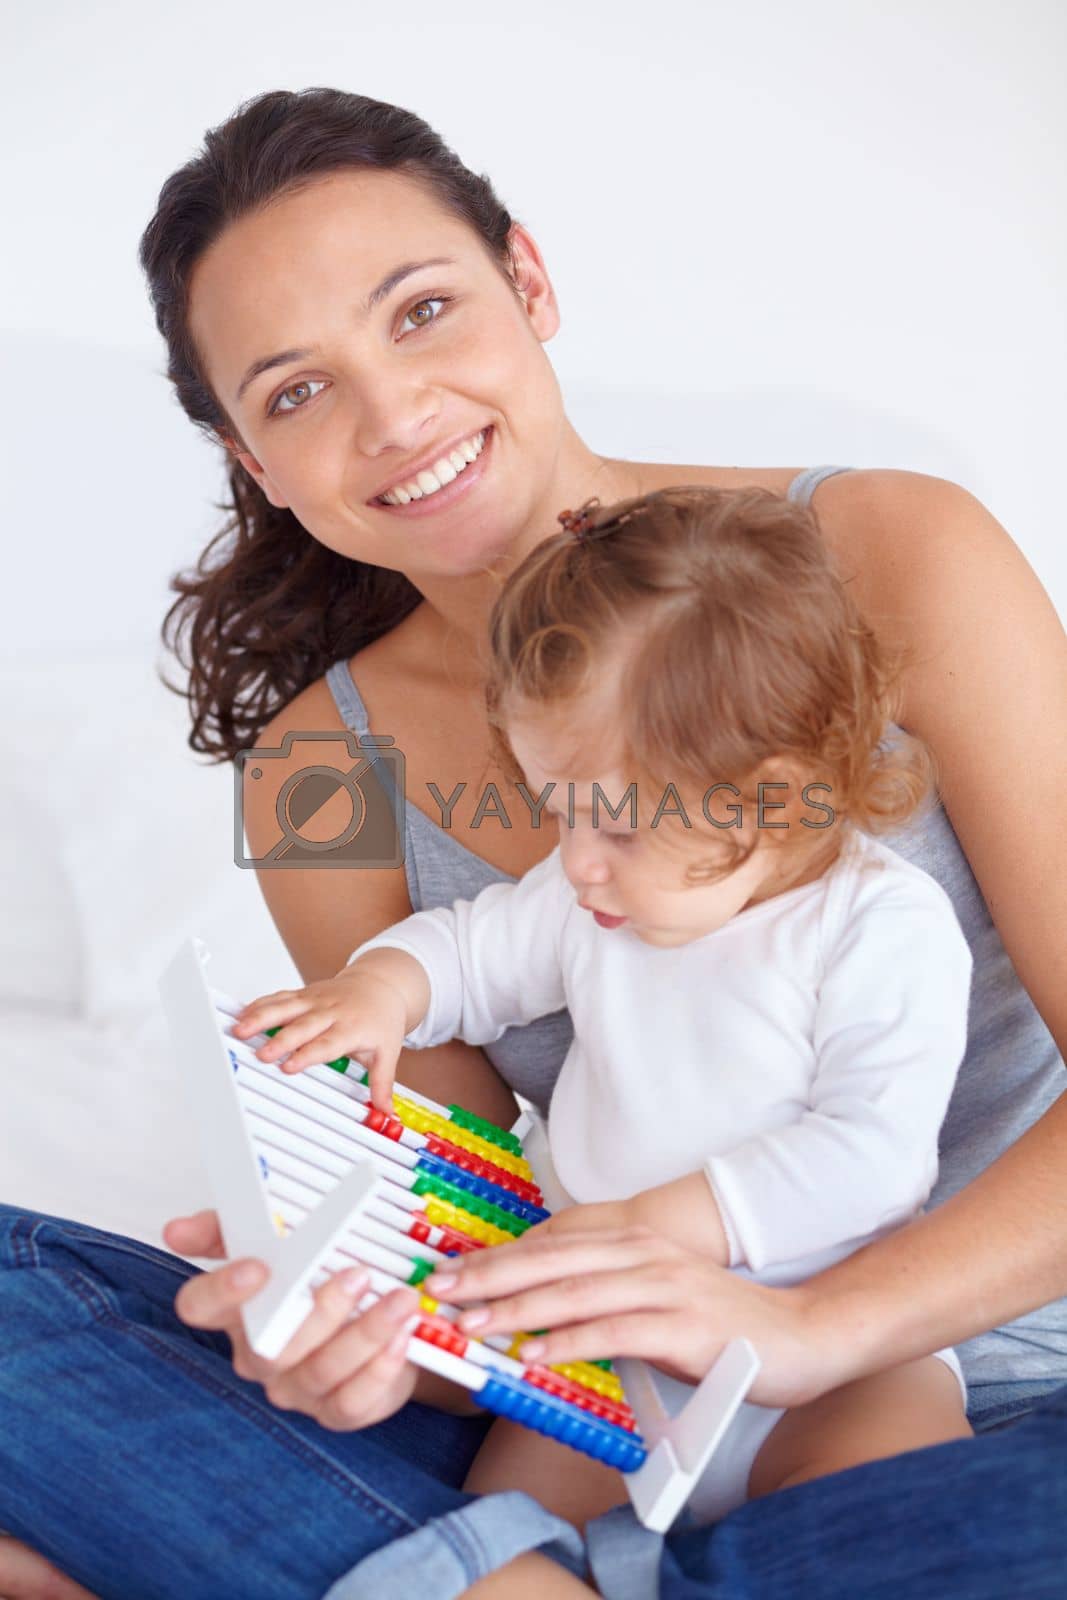 Royalty free image of Helping her daughter learn. A mother showing her baby daughter how an abacus works. by YuriArcurs